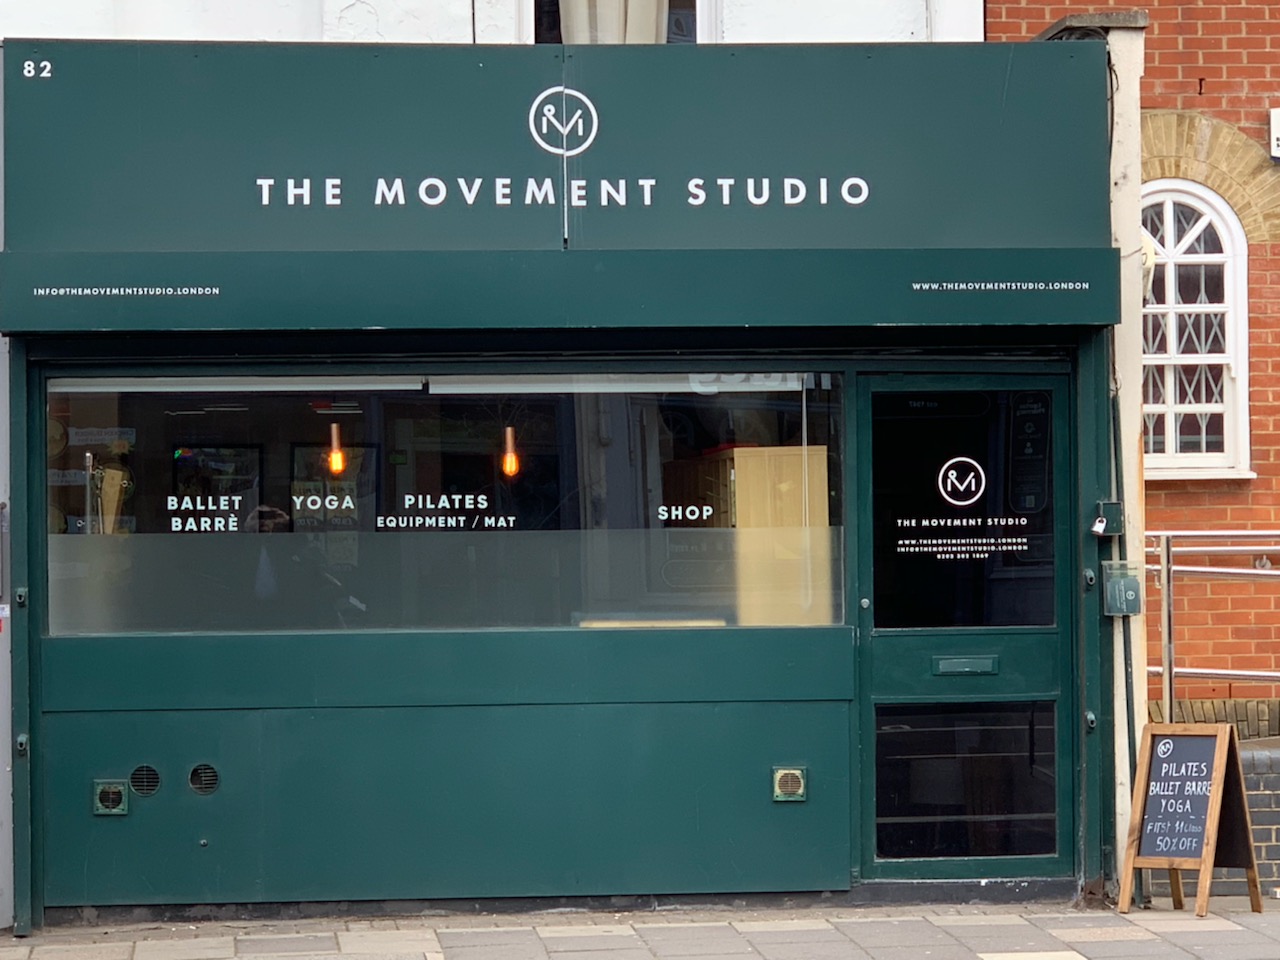 The Movement Studio in Holloway